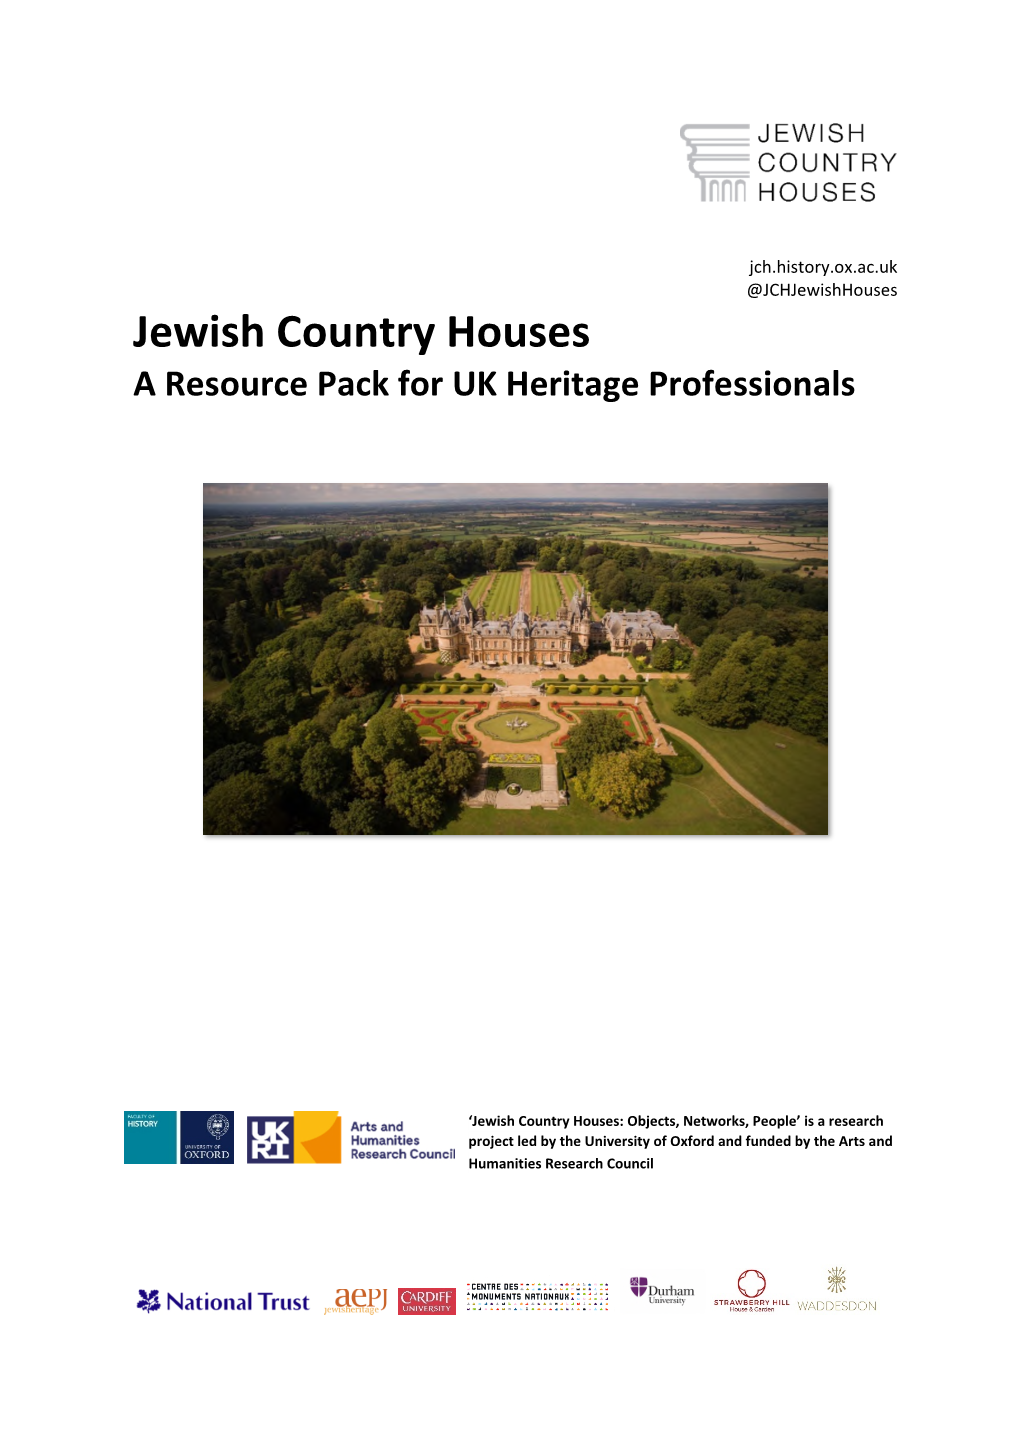 Jewish Country Houses: a Resource Pack